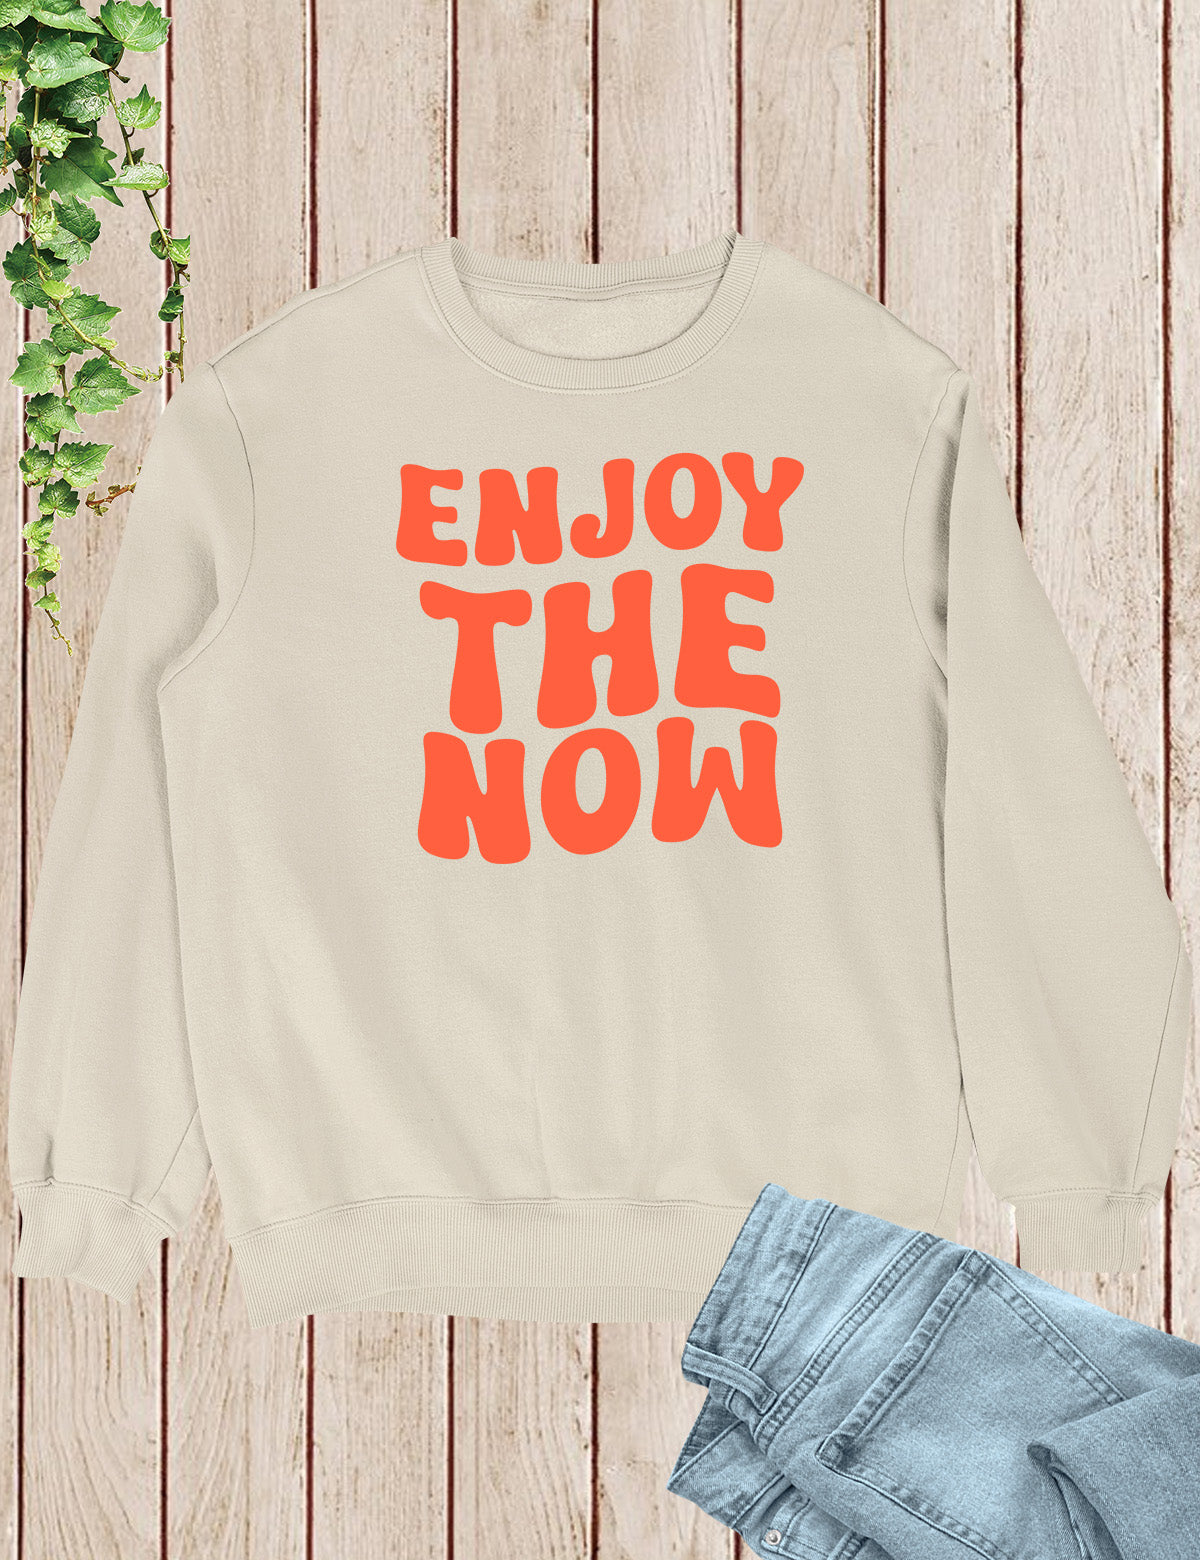 Embrace the present moment and spread joy with our 'Enjoy The Now' Funny Christian Sweatshirt, a delightful reminder to live life to the fullest in faith and laughter